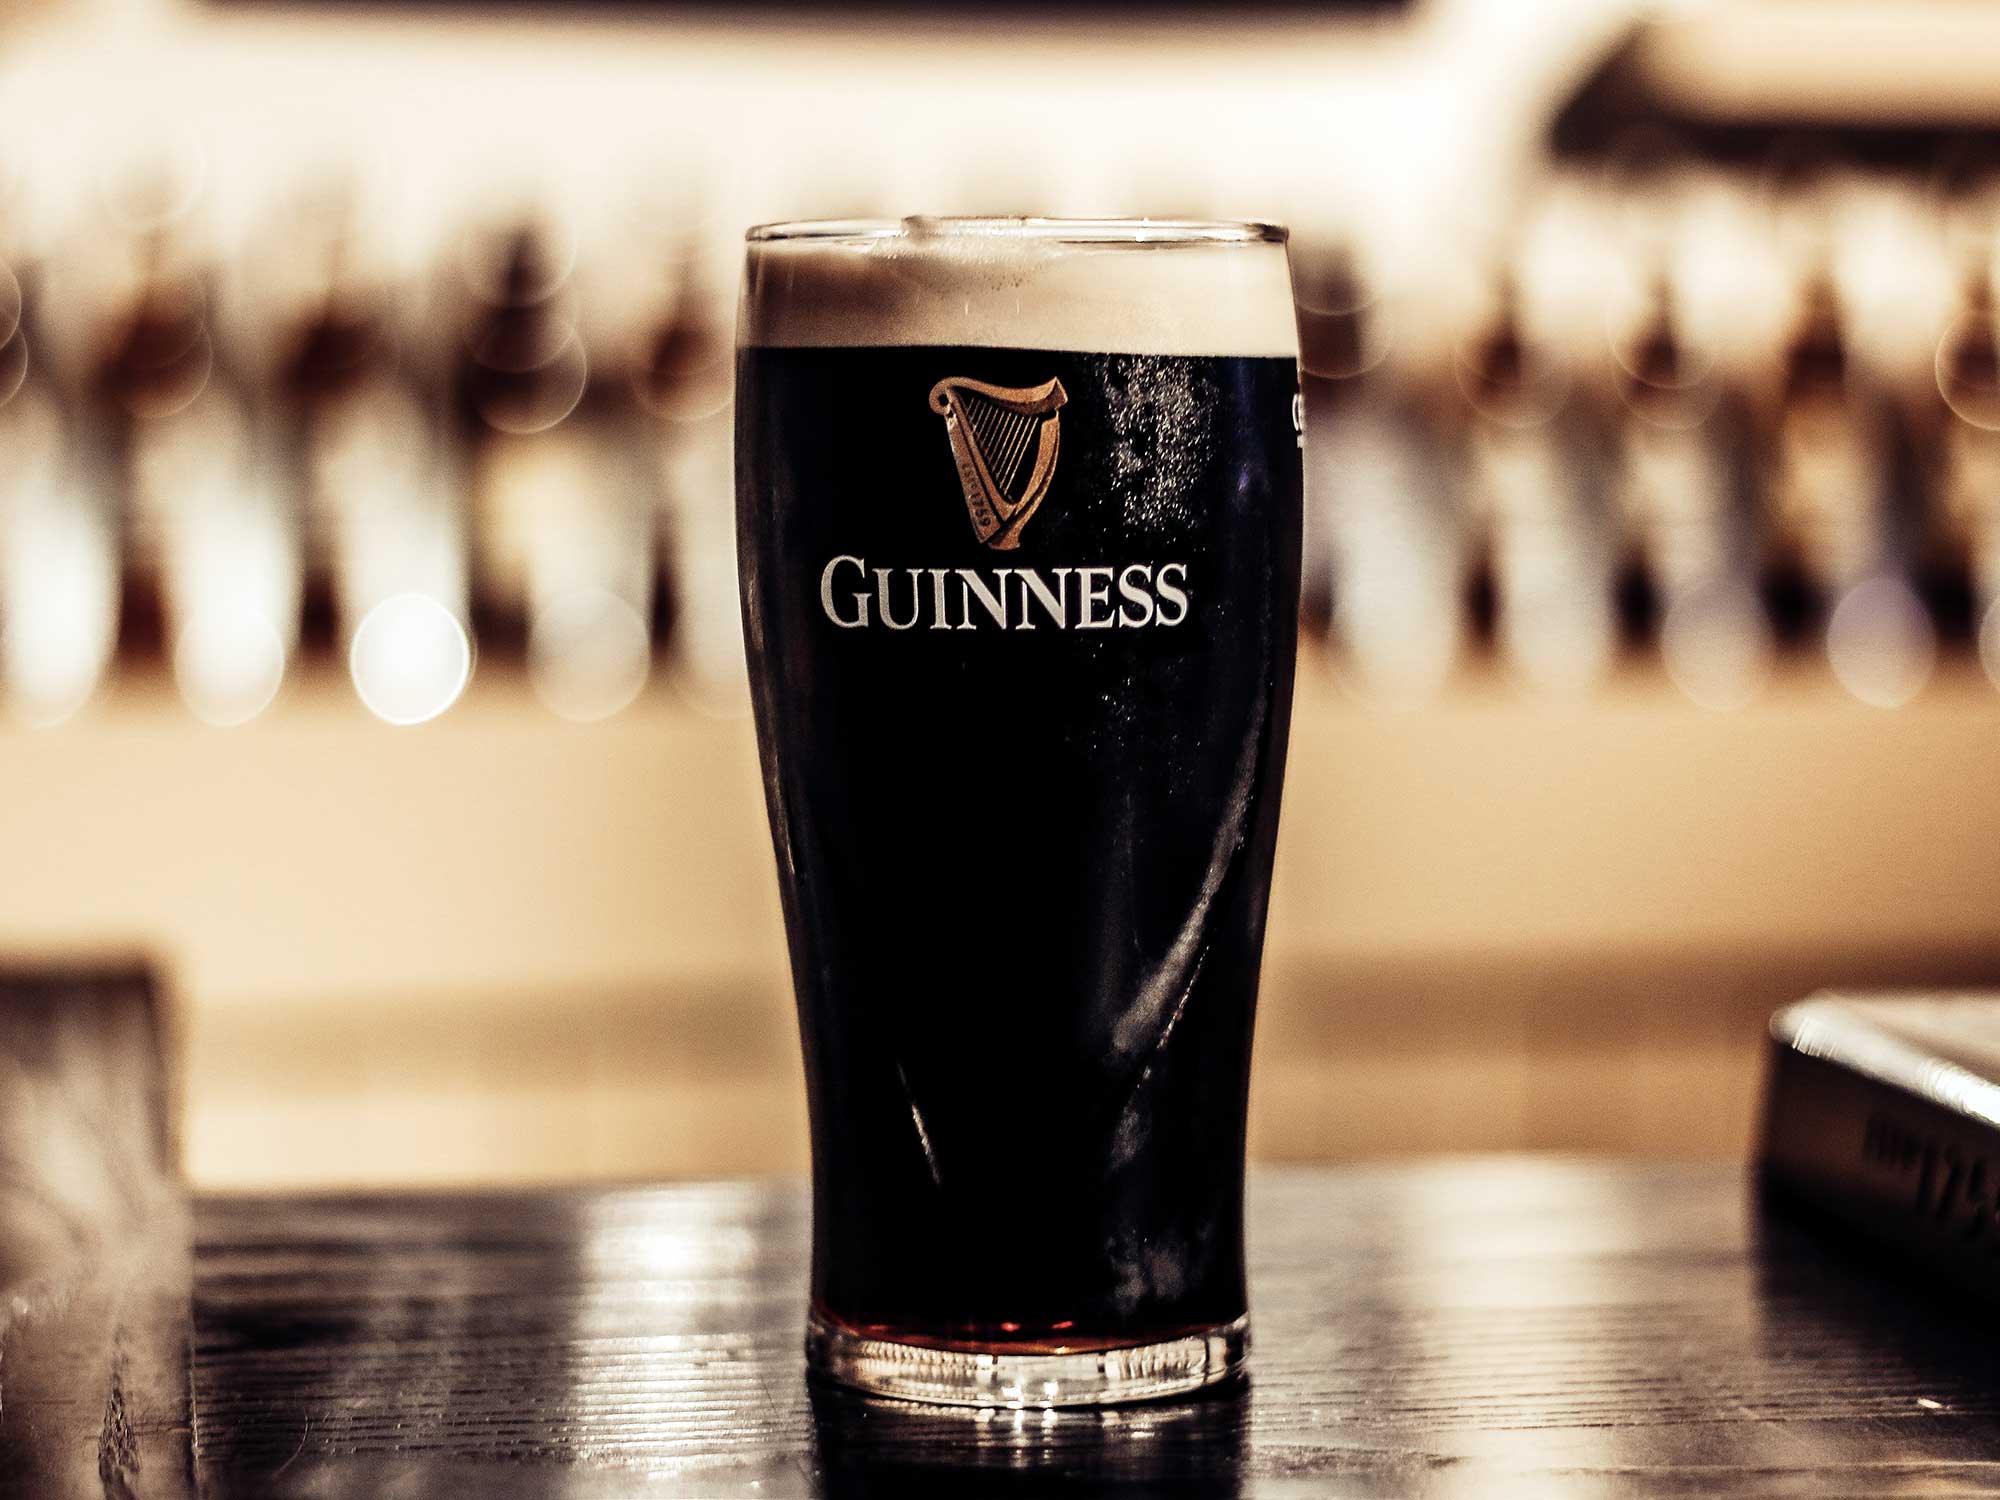 https://www.toeuropeandbeyond.com/wp-content/uploads/2022/01/a-guide-to-drinking-guinness.jpg